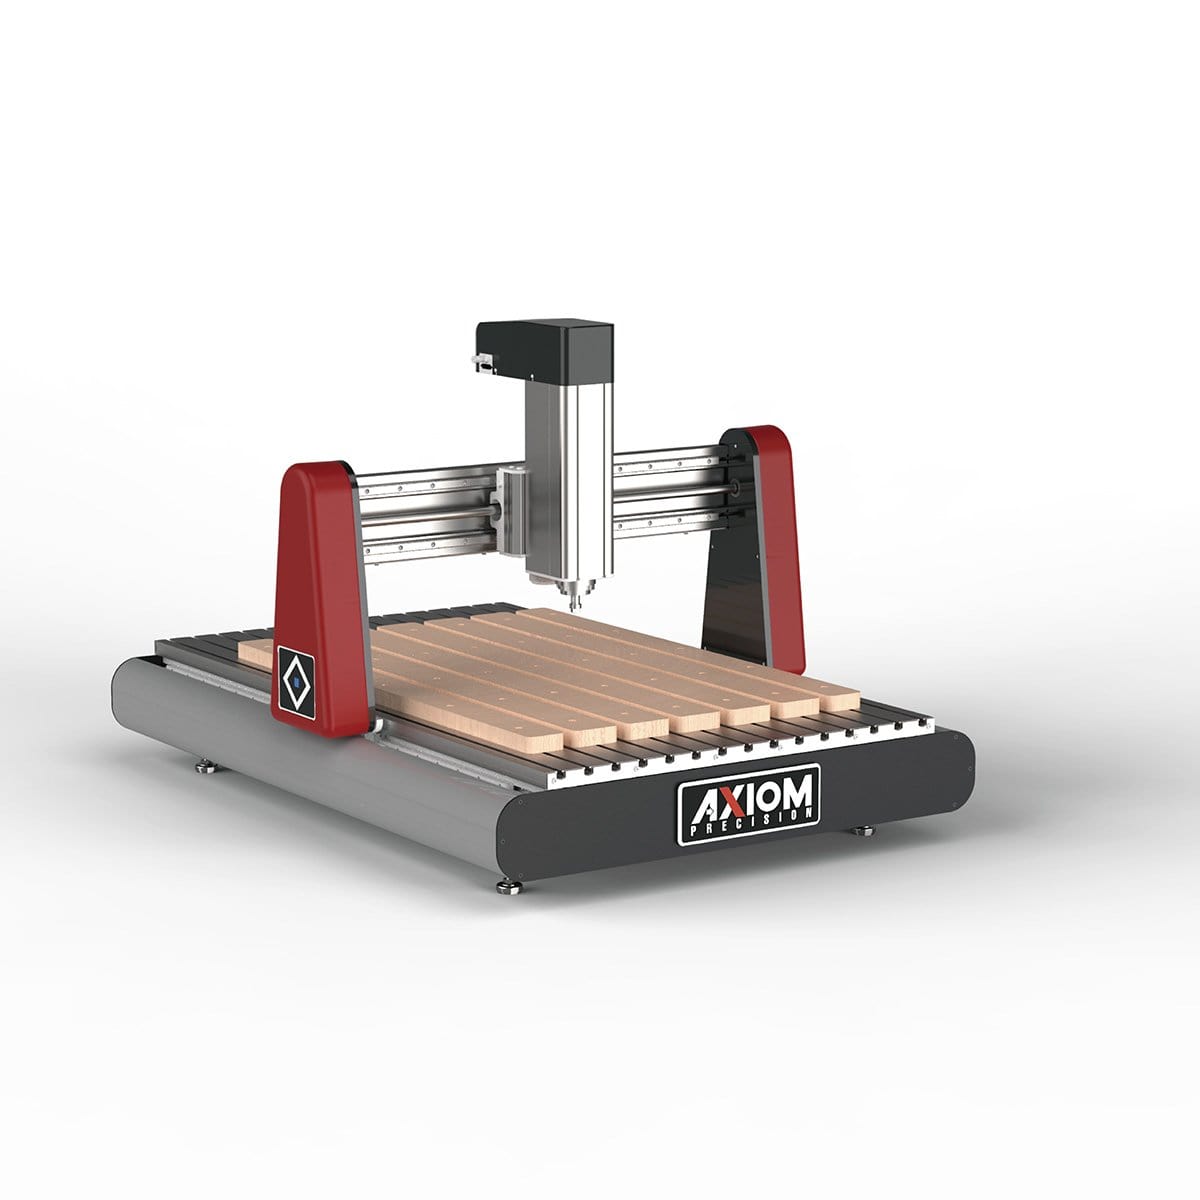 Axiom Precision ICONIC6 CNC Router Iconic Series 24" x 36" CNC Router